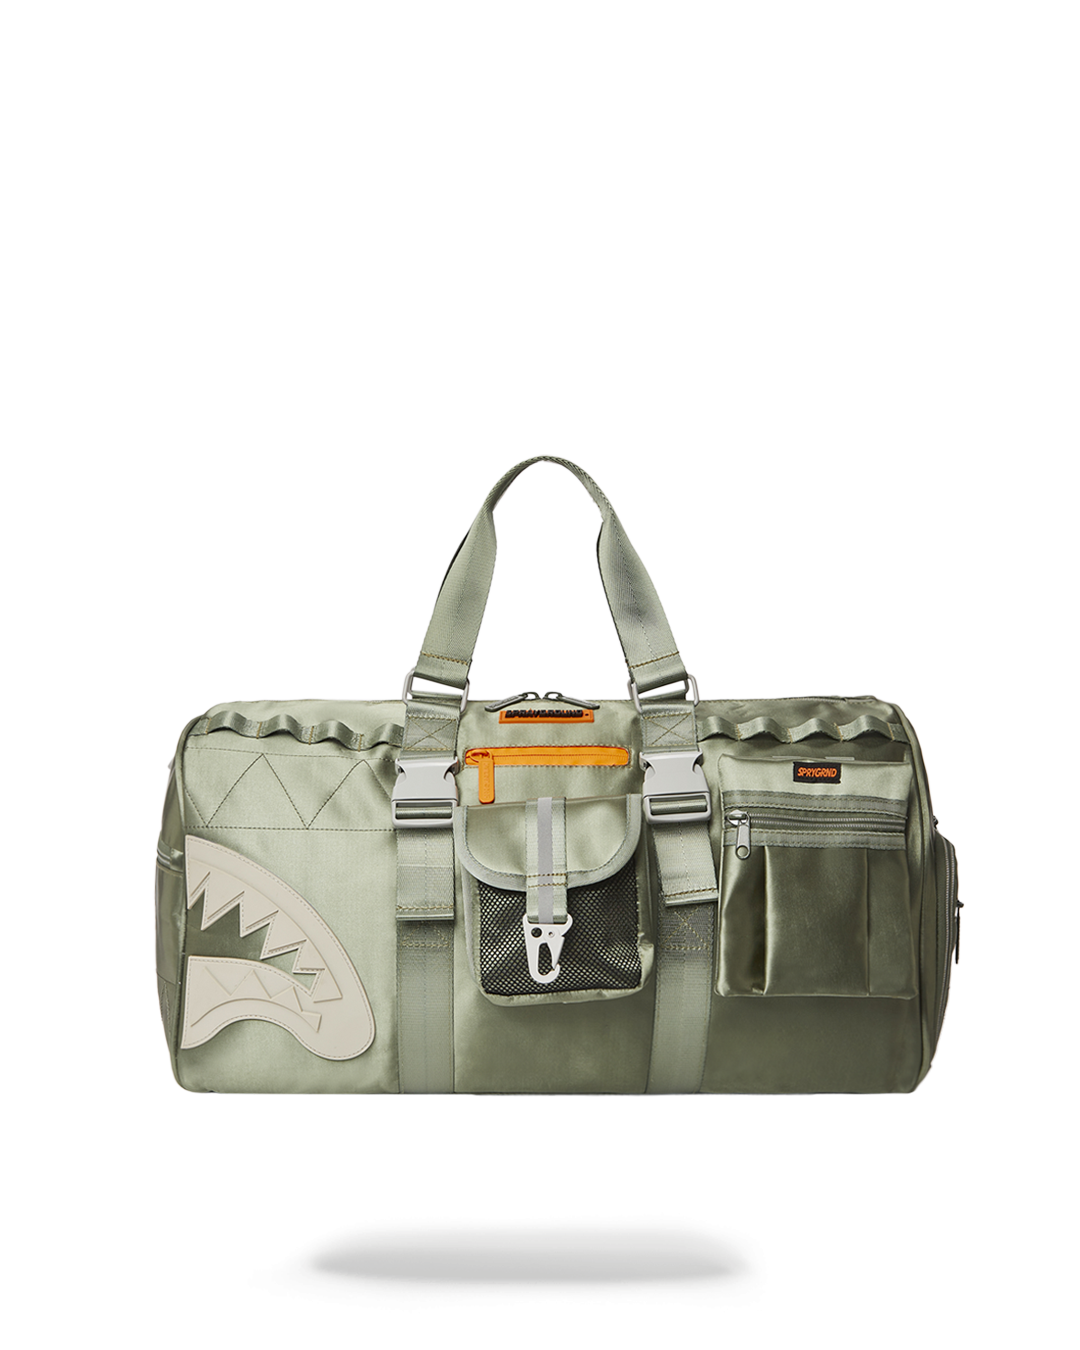 SPRAYGROUND® DUFFLE SPECIAL OPS AIRBORNE DUFFLE